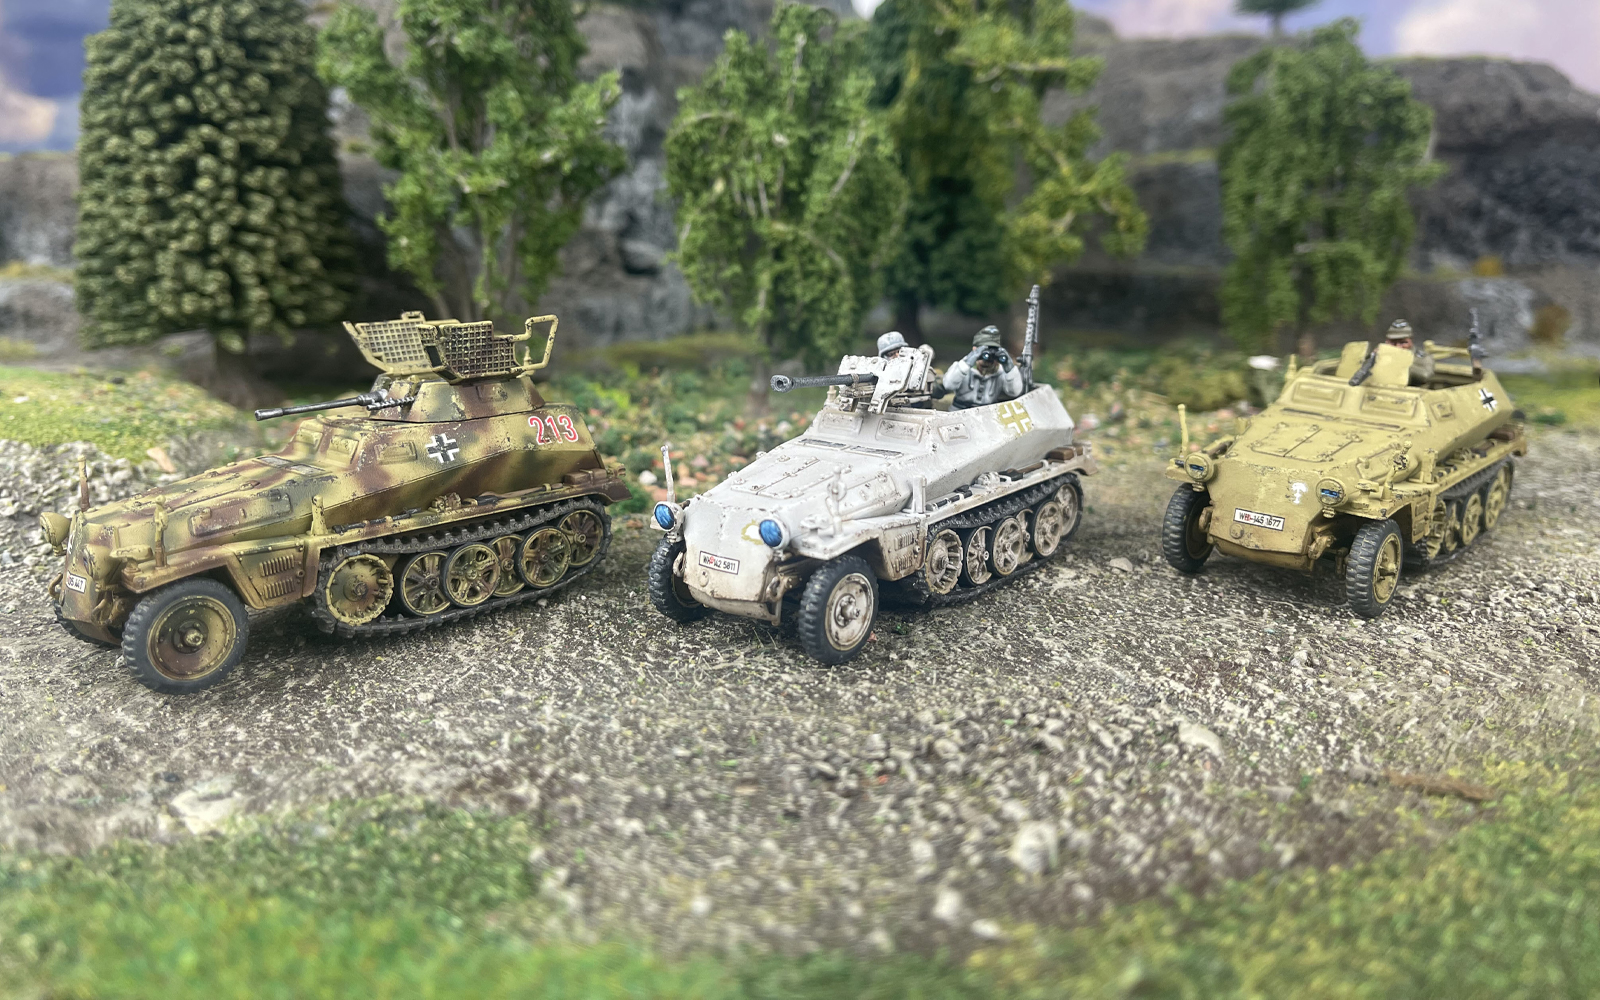 https://warlord-community.warlordgames.com/wp-content/uploads/2022/03/Incoming-Sd.Kfz-250-Article-Header.jpg